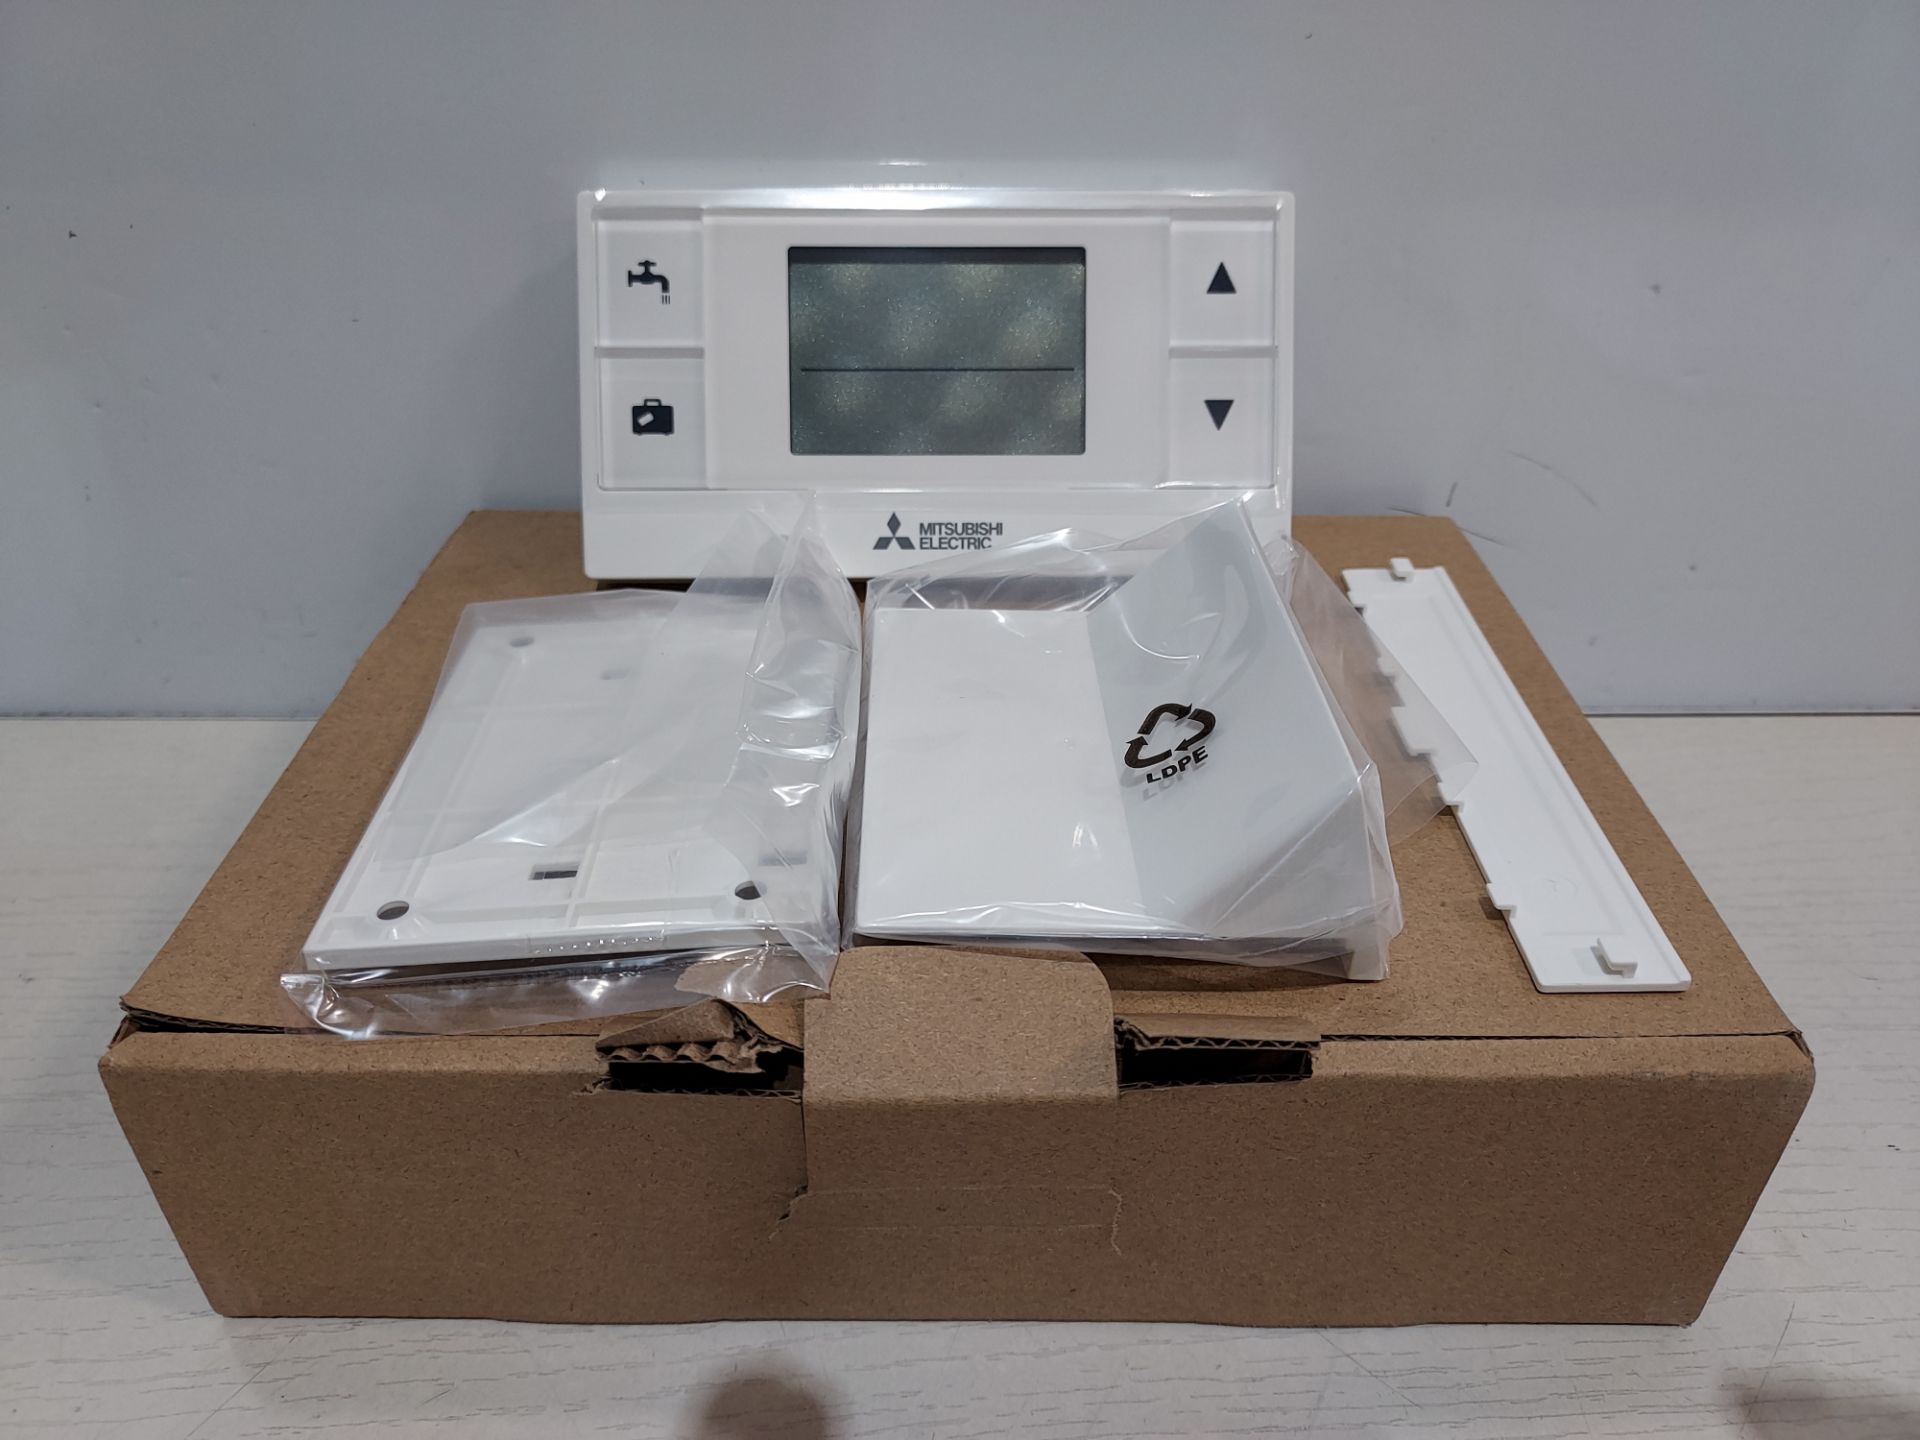 5 X BRAND NEW MITSUBISHI ELECTRIC AIR TO WATER WIRELESS REMOTE CONTROLLERS (MODEL : PAR - WT50R-